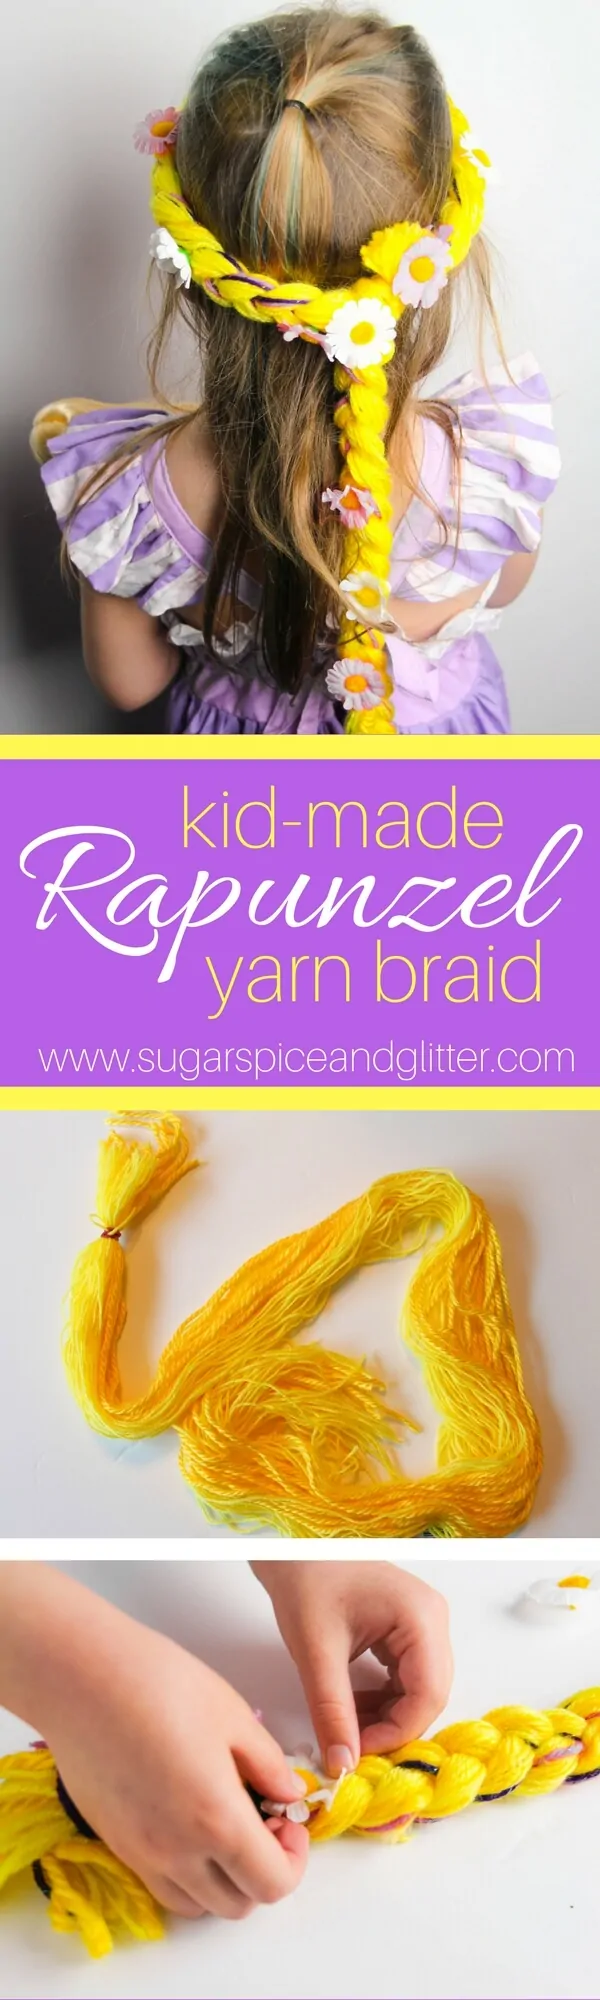 An easy Disney-inspired craft for kids, this Rapunzel yarn braid can be made with just about any color of leftover yarn - white for Elsa, red for Ariel, brown for Belle. A great movie night craft or homemade costume idea